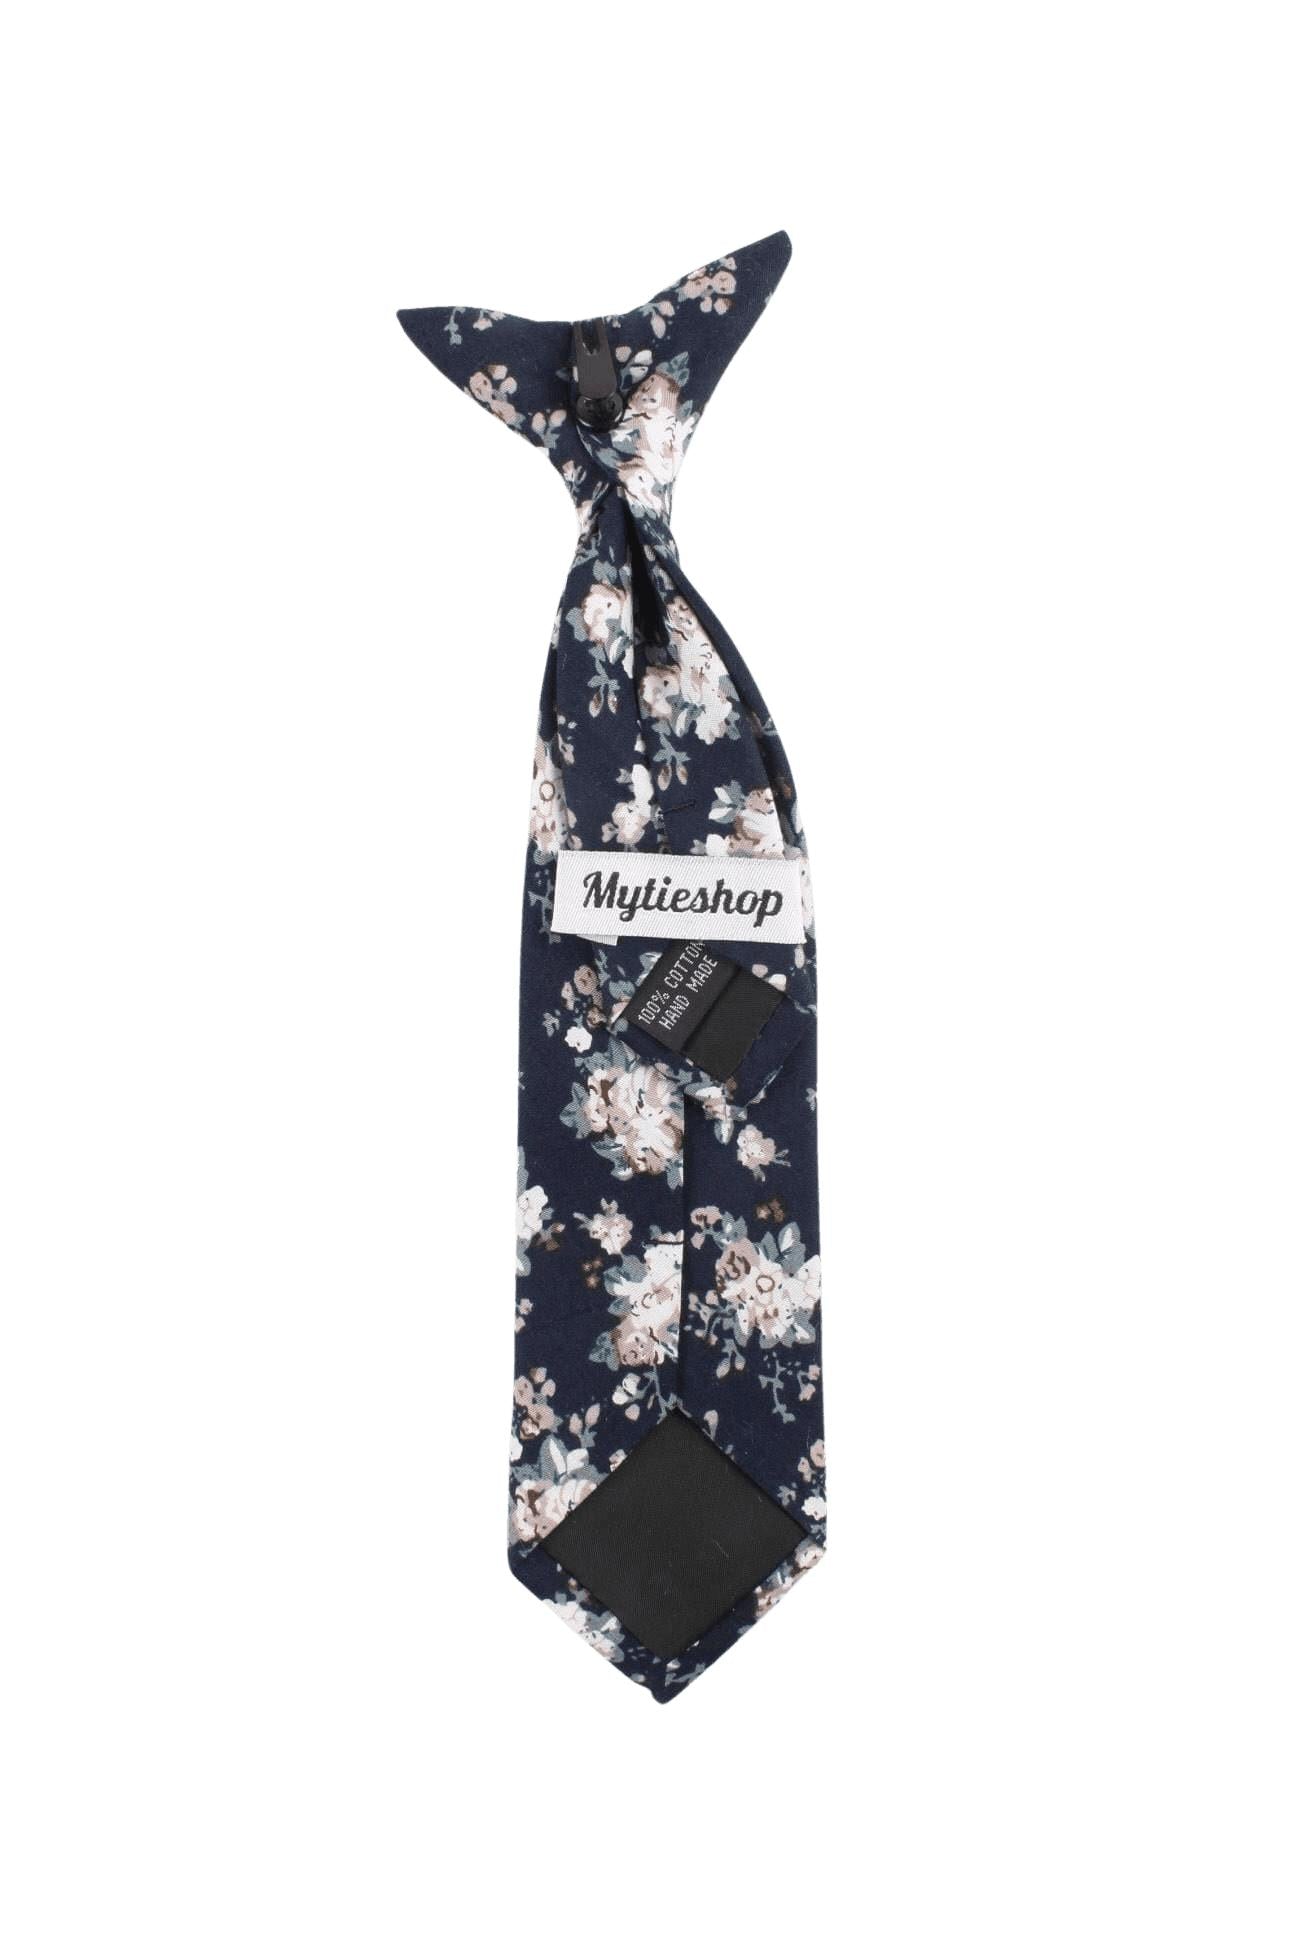 Boys Navy Floral Skinny Tie 2.3" by Mytieshop - FINLEY-Boys Navy Floral Skinny Tie Material:Cotton Blend Approx Size: Max width: 6.5 cm / 2.4 inches 9-24 months 26 CM2-5 years 31 CM9-11 Years 43 CM Base Color: Navy Blue-Mytieshop